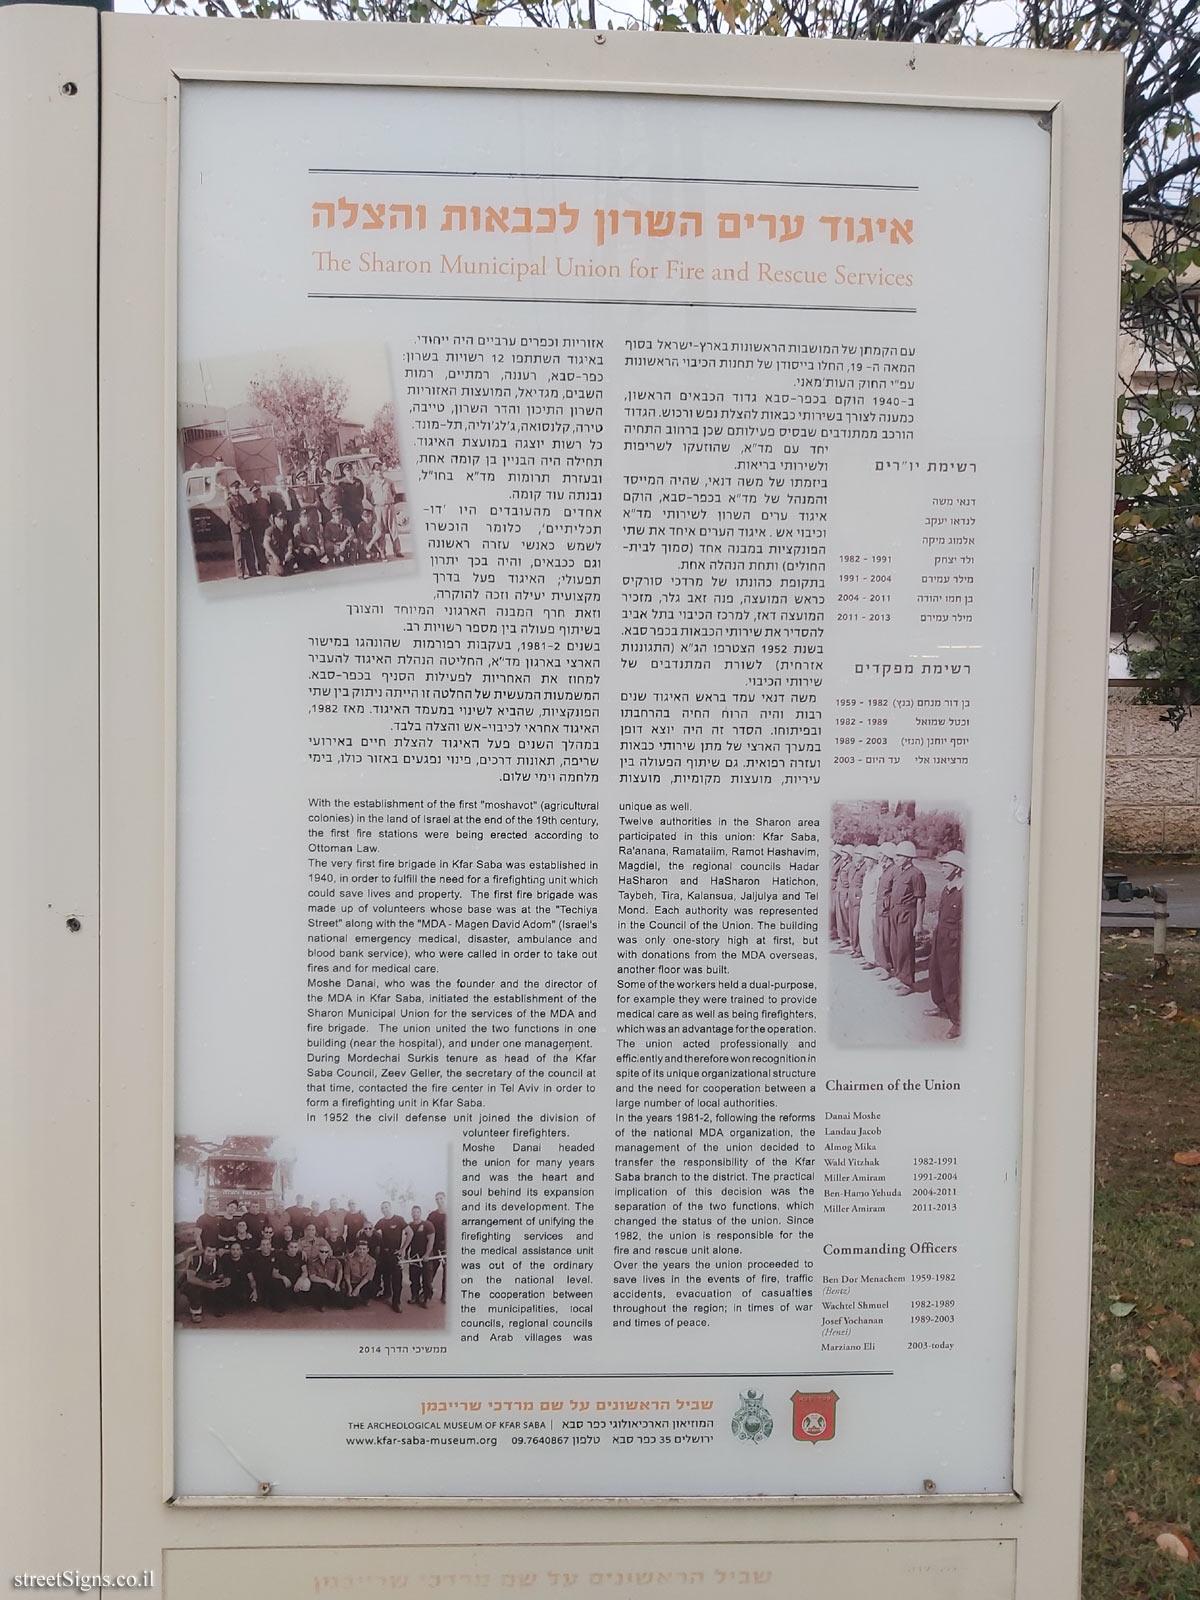 Kfar Saba - The Founders’ Path - Station 13 - The Sharon Municipal Union for Fire and Rescue (the other side)